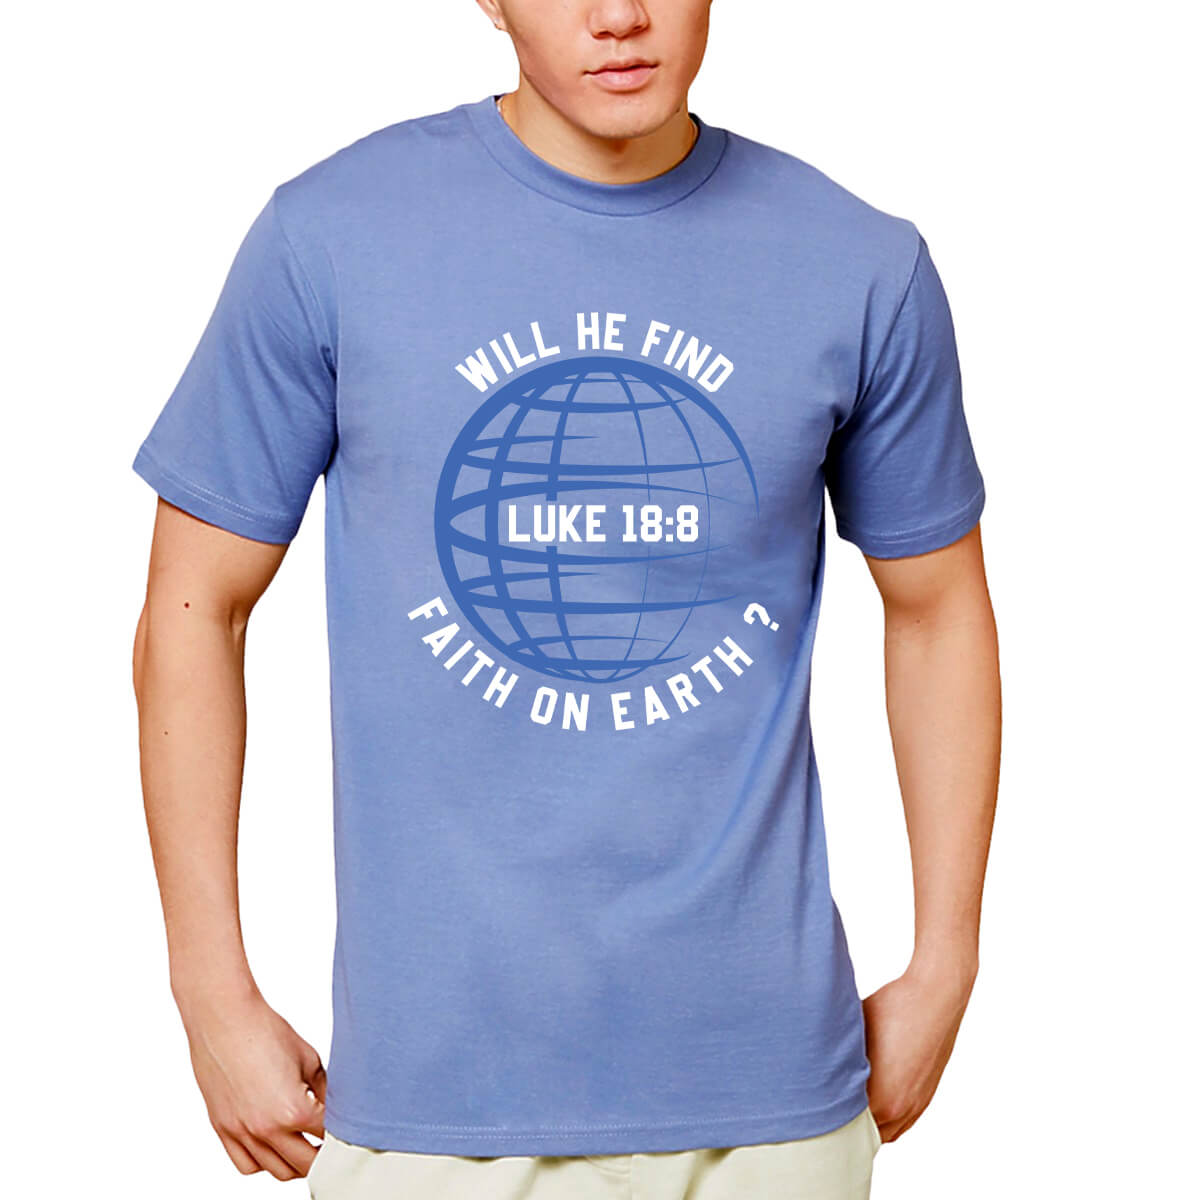 Will He Find Faith On Earth Men's T-Shirt